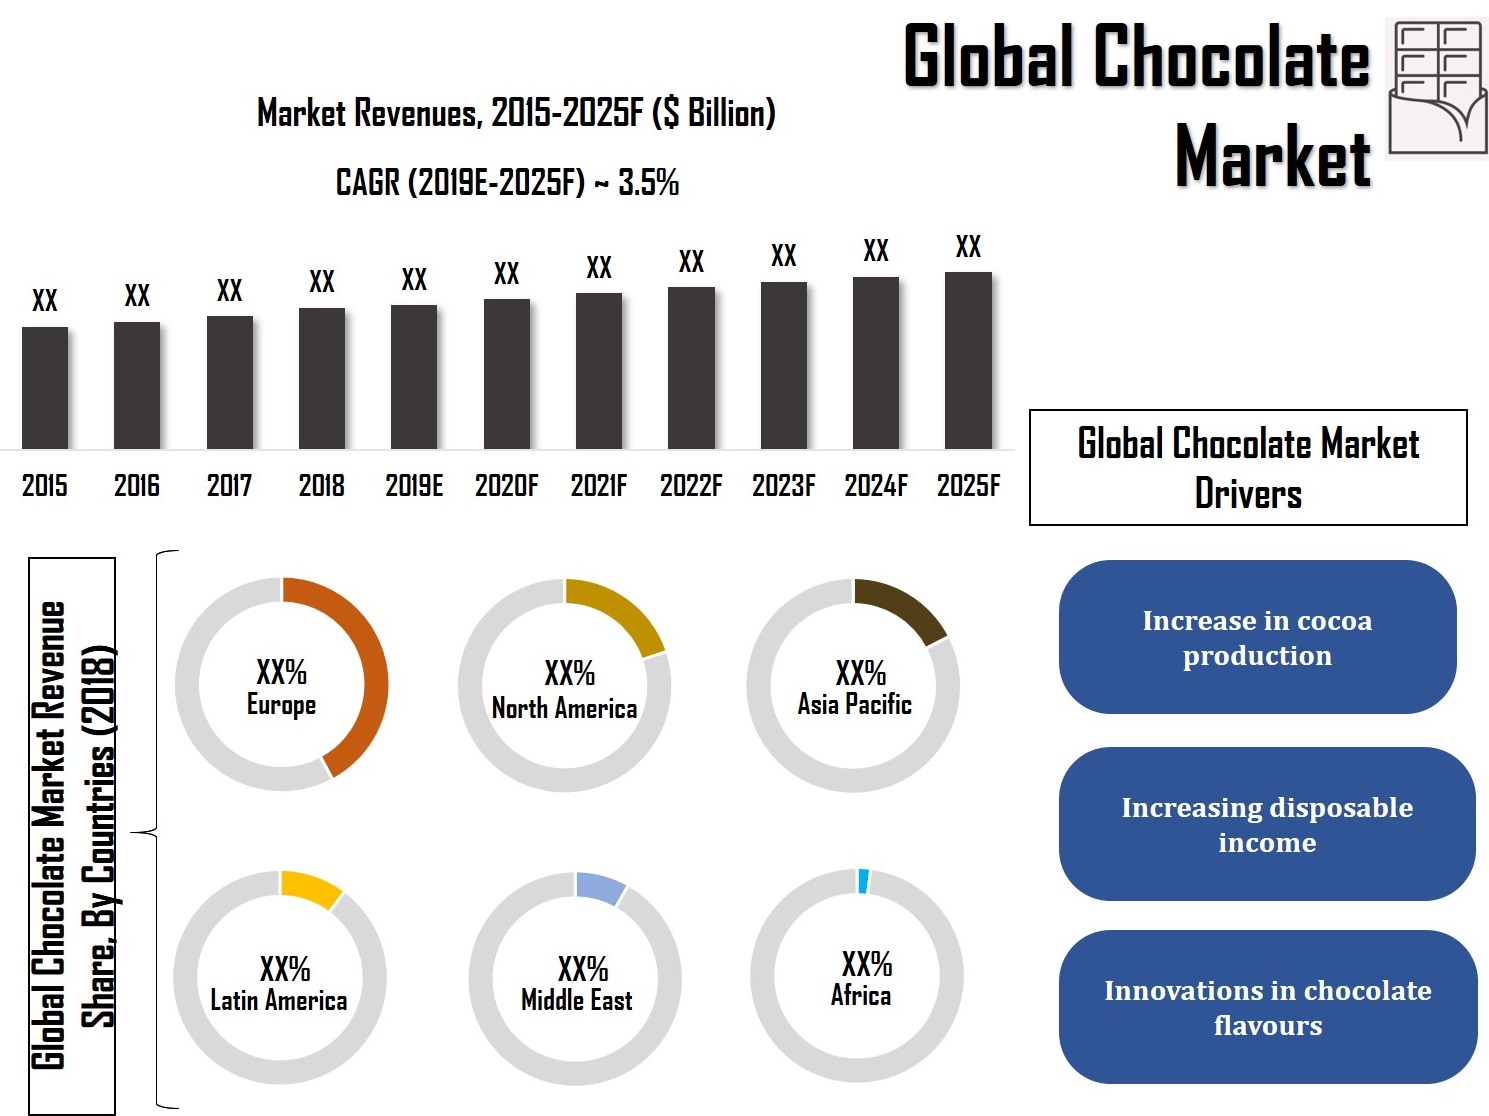 Global Chocolate Market Overview